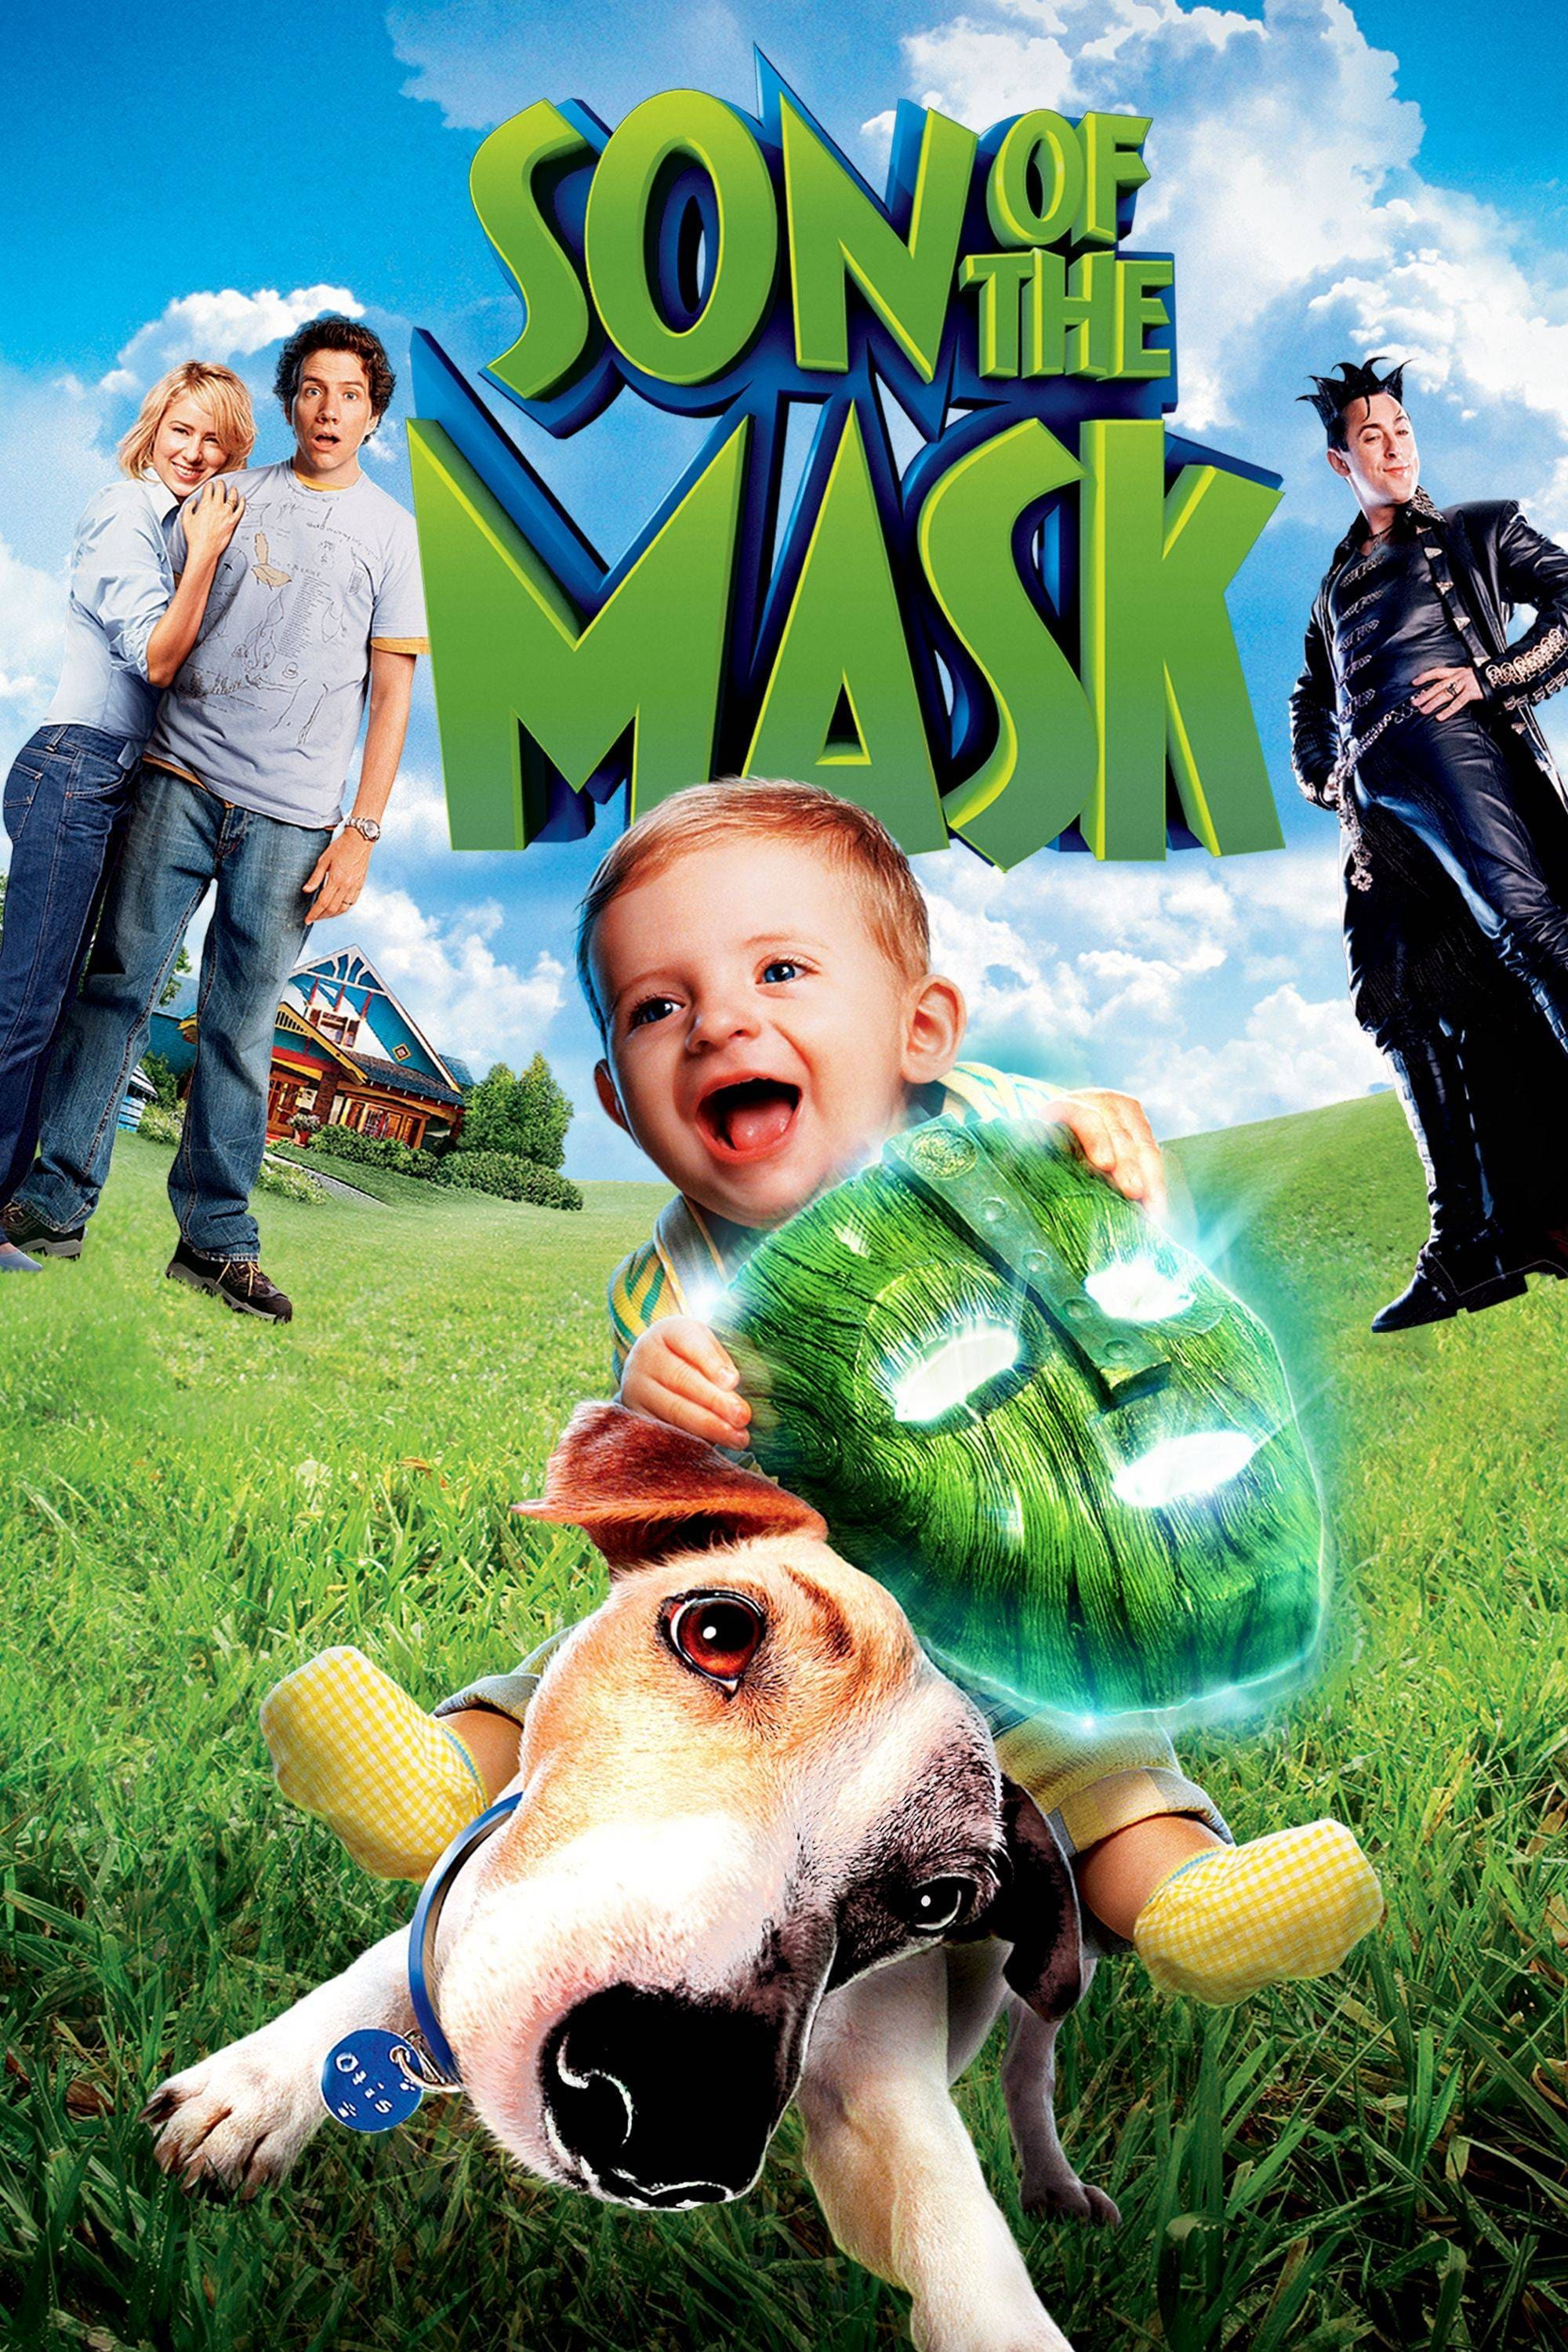 Poster Phim Đứa Con Của Mặt Nạ (Son of the Mask)